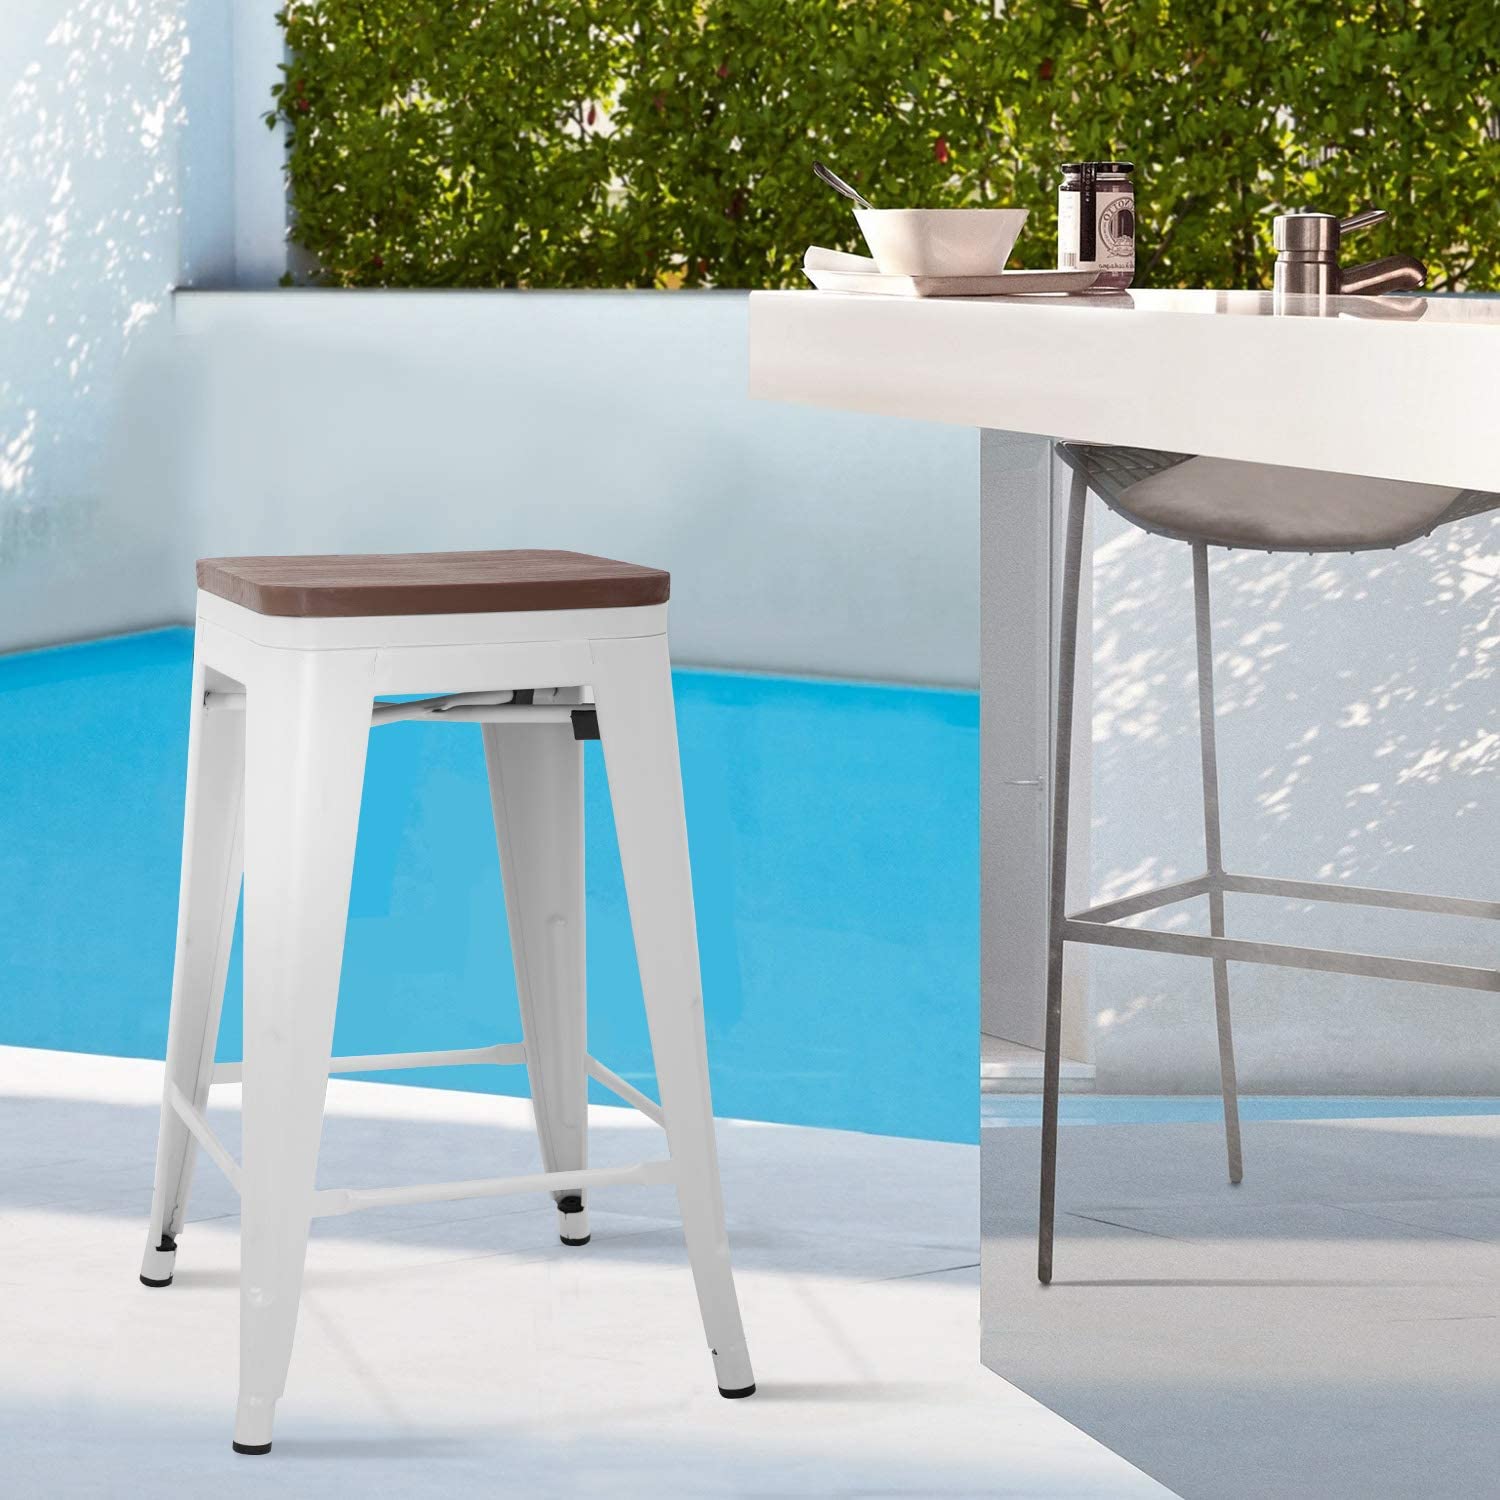 24 Inches Metal Bar Stools Set of 4 Counter Height Wood Seat Barstool Patio Stool Stackable Backless Stool Indoor Outdoor Metal Kitchen Stools Bar Chairs (White) - image 3 of 7